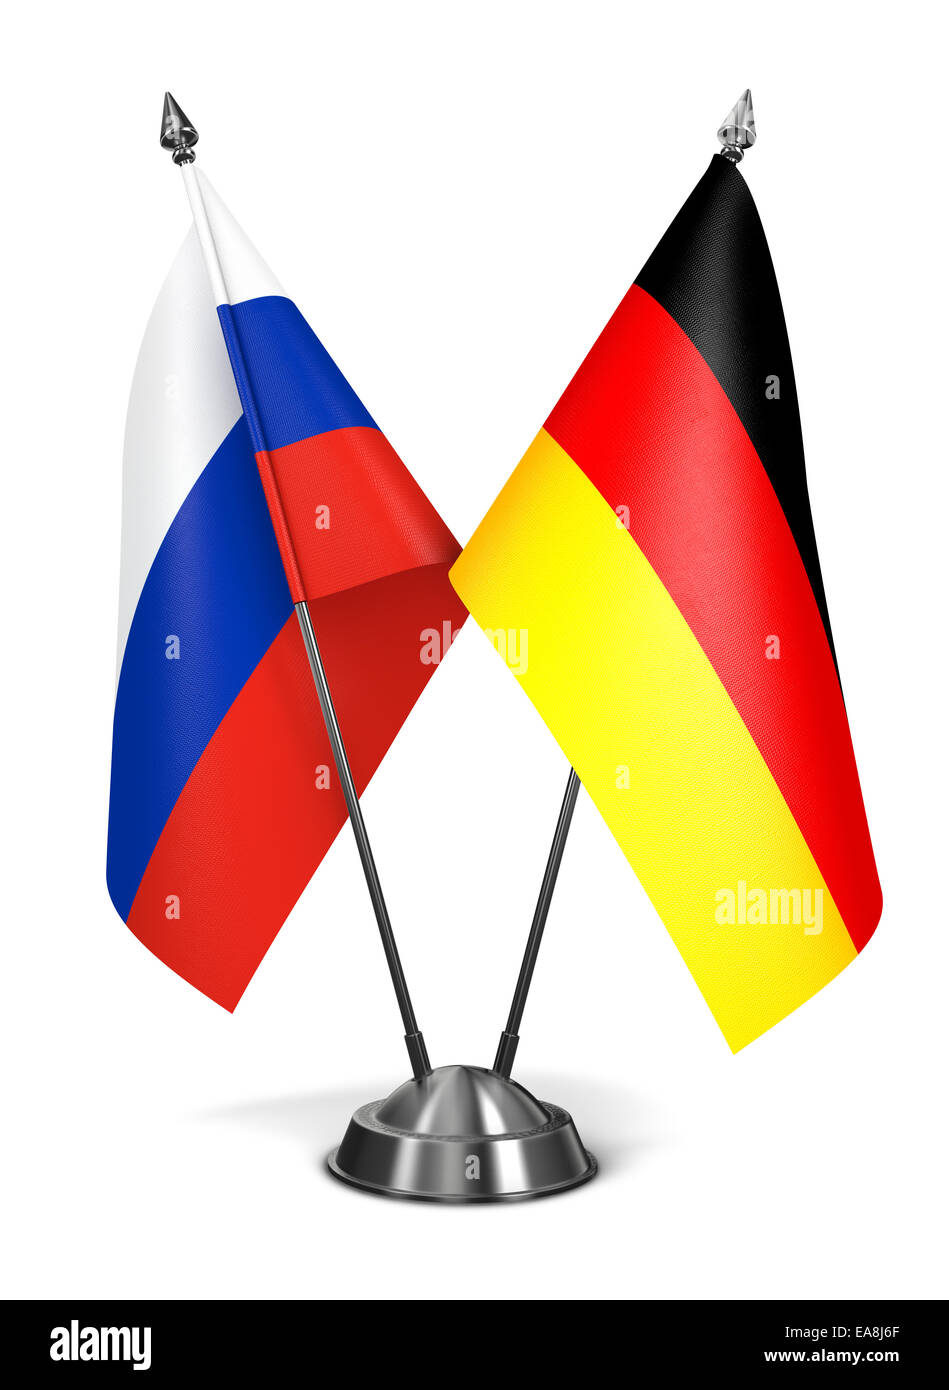 Russia and Federal Republic of Germany - Miniature Flags Isolated on White Background. Stock Photo